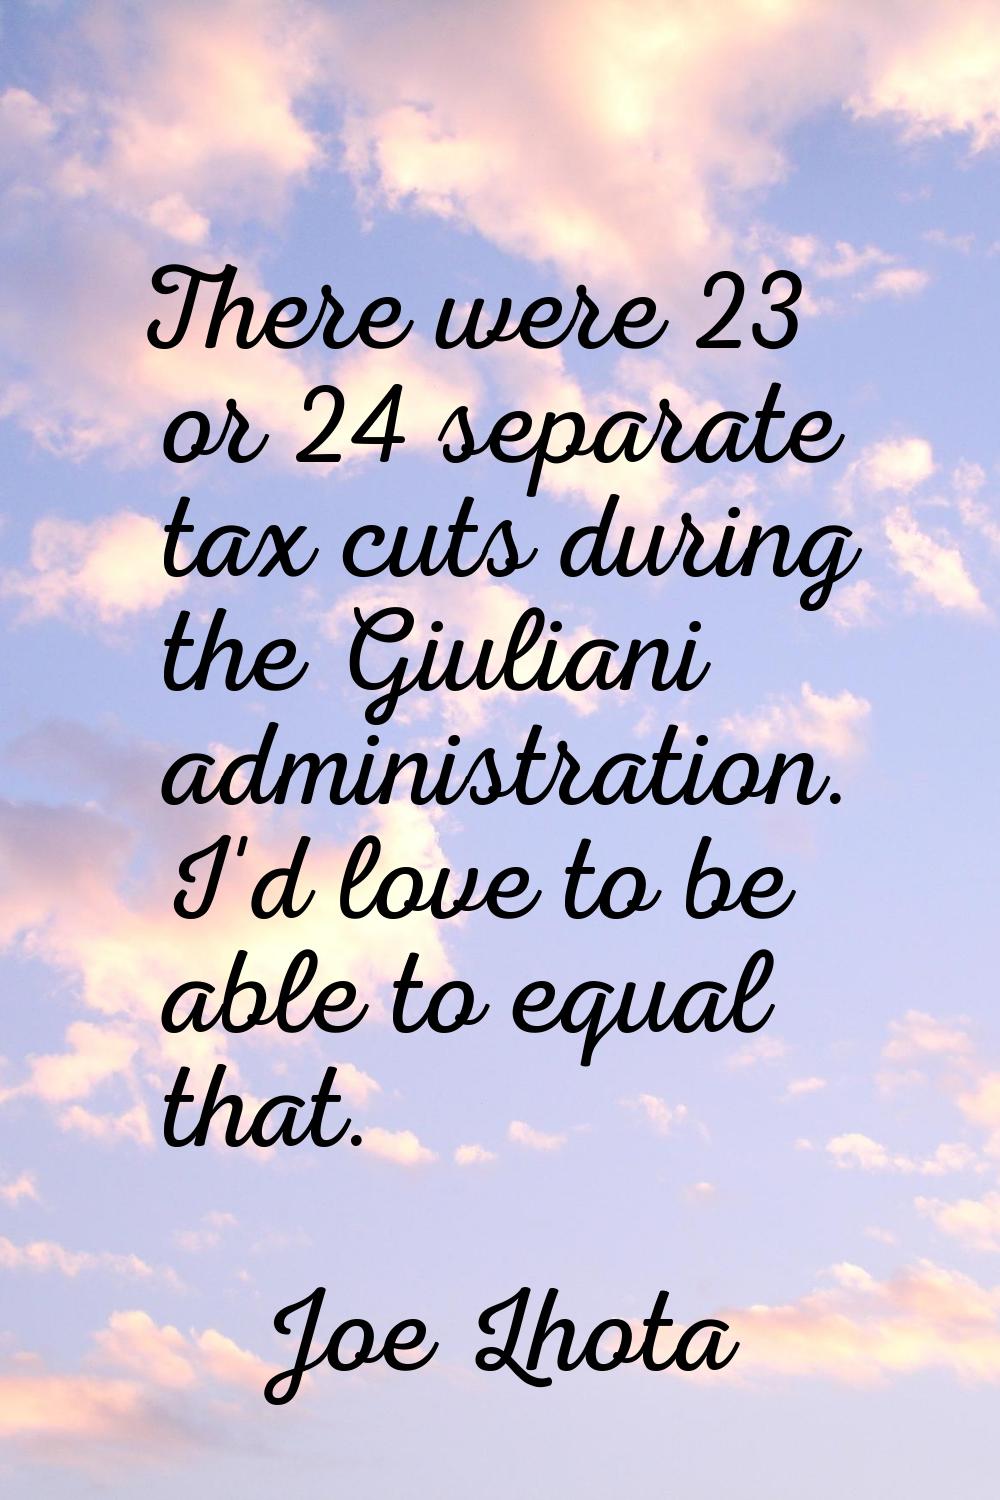 There were 23 or 24 separate tax cuts during the Giuliani administration. I'd love to be able to eq